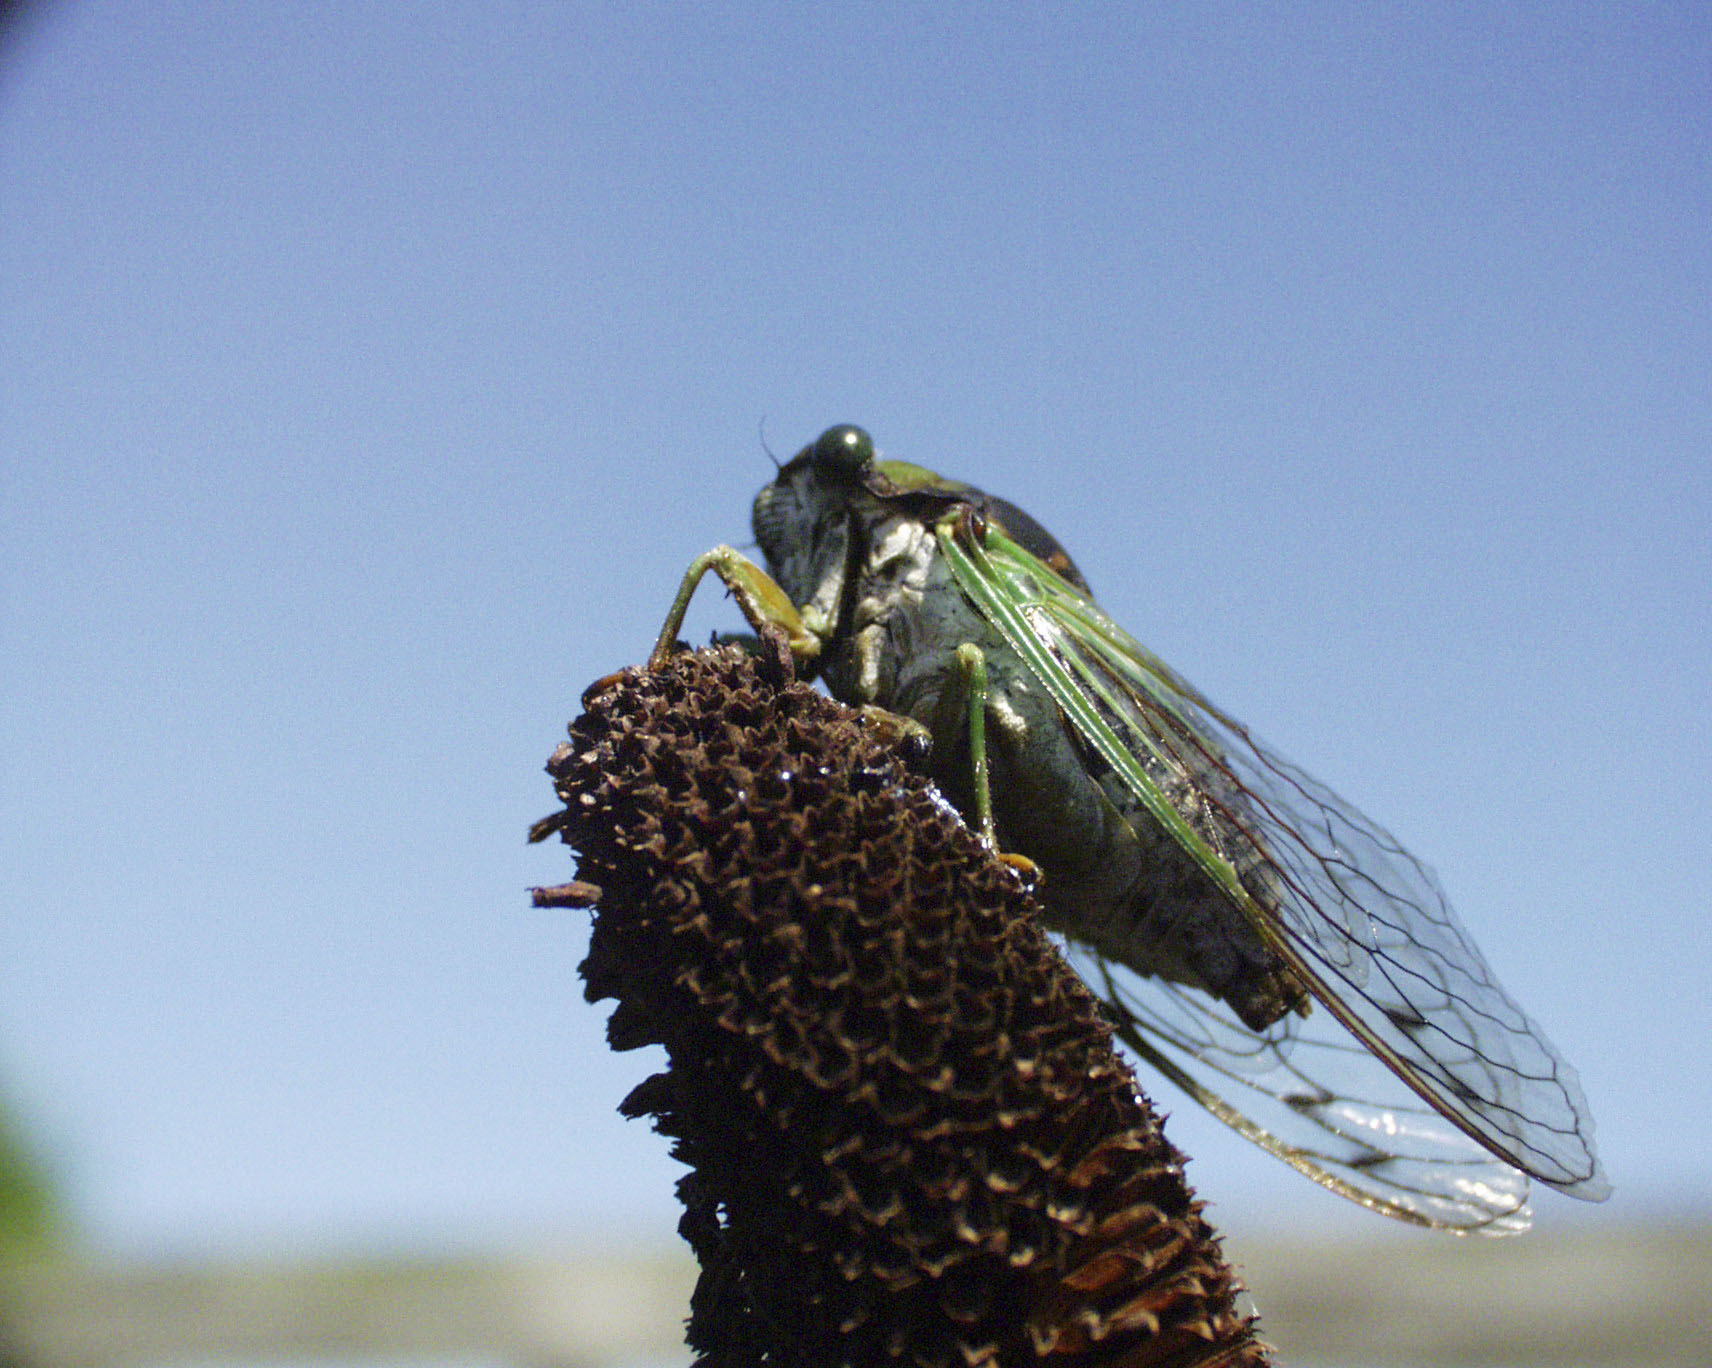 The cicada with blue-green wing veins is an annual or ‘dog-day’ cicada. These have a much shorter life cycle  and emerge later around mid-summer. Most people have heard the buzzing call of the males from high in the trees. They are here on Long Island every year.    COURTESY DANIEL OWEN   GILREIN